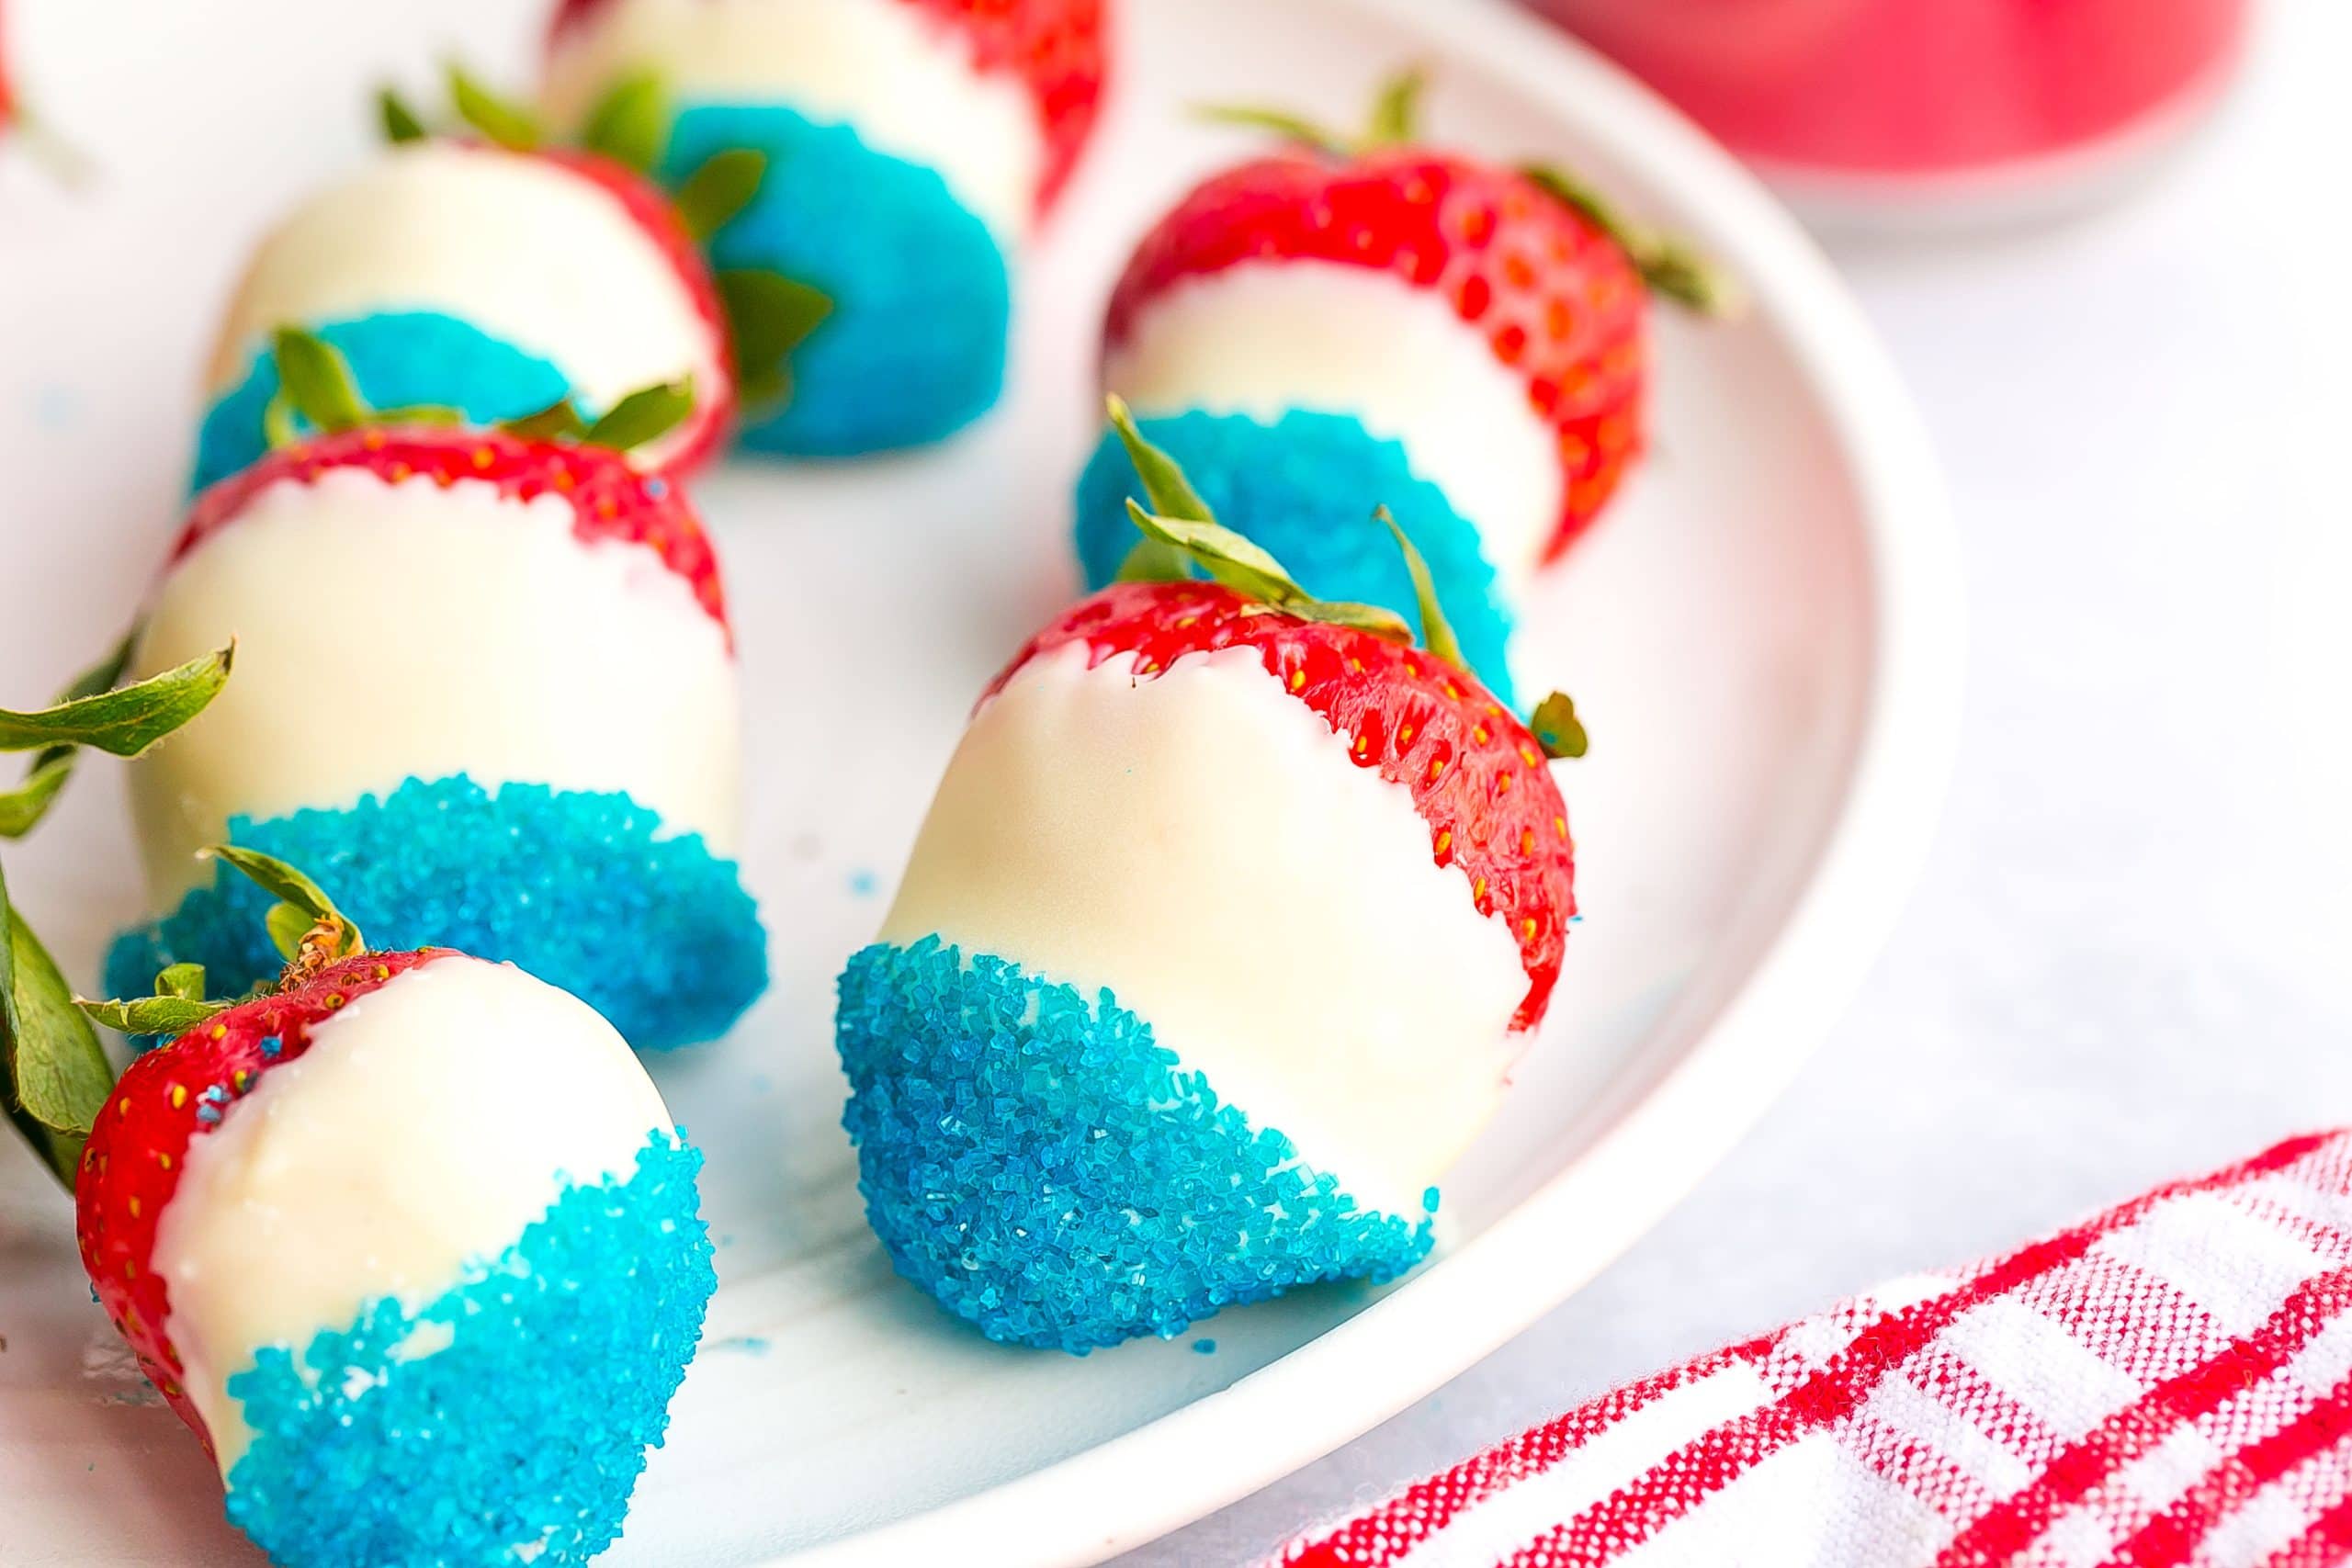 White chocolate dipped strawberries with blue sugar.